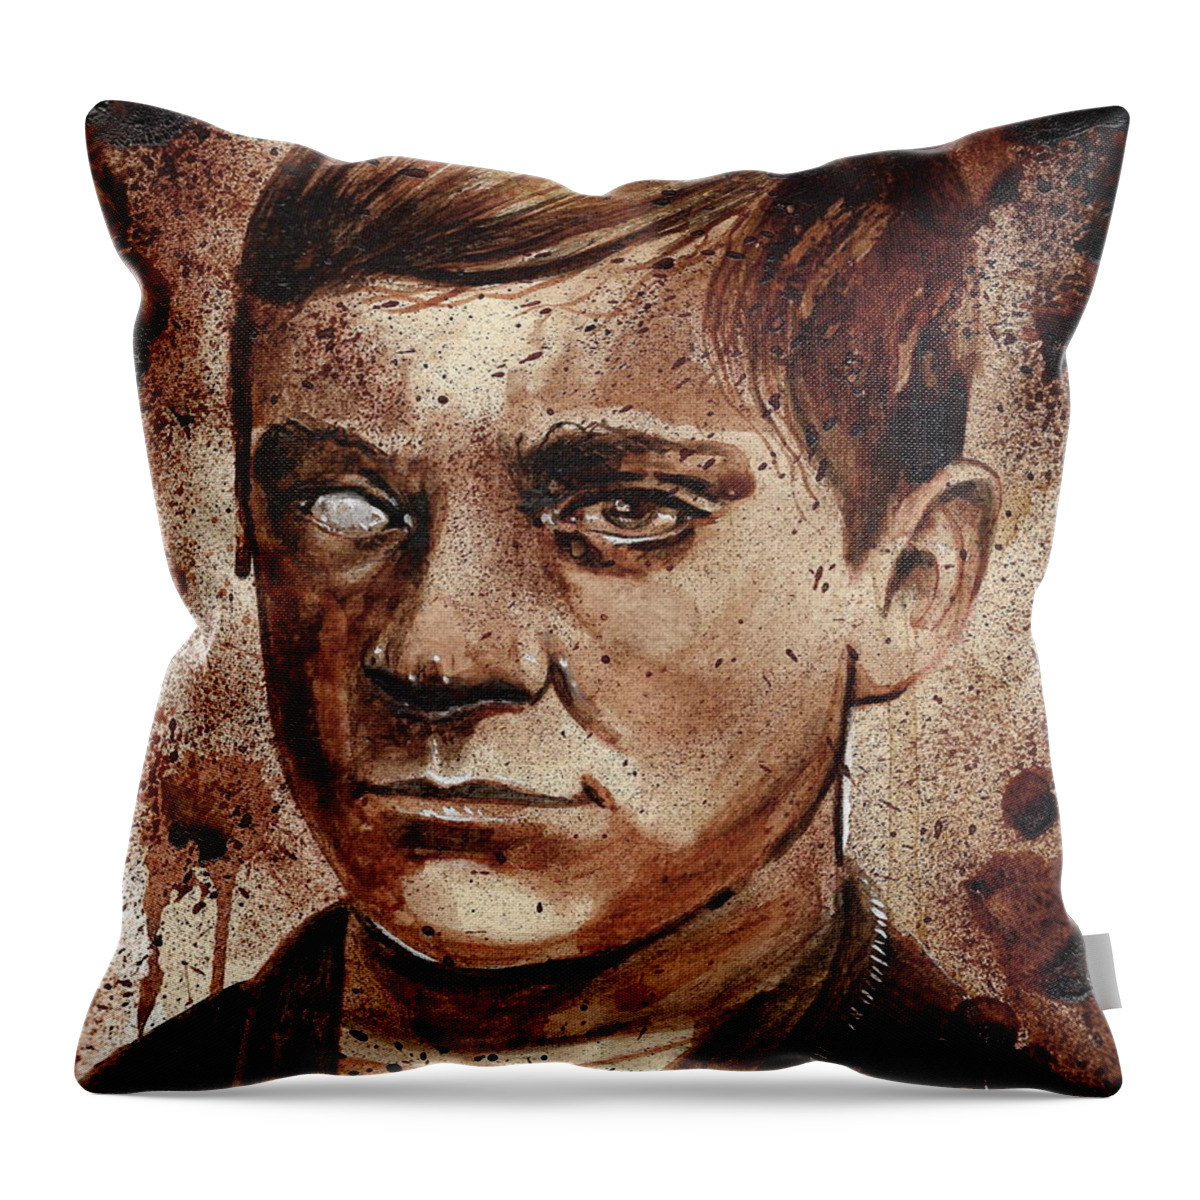 Ryan Almighty Throw Pillow featuring the painting JESSE POMEROY dry blood by Ryan Almighty